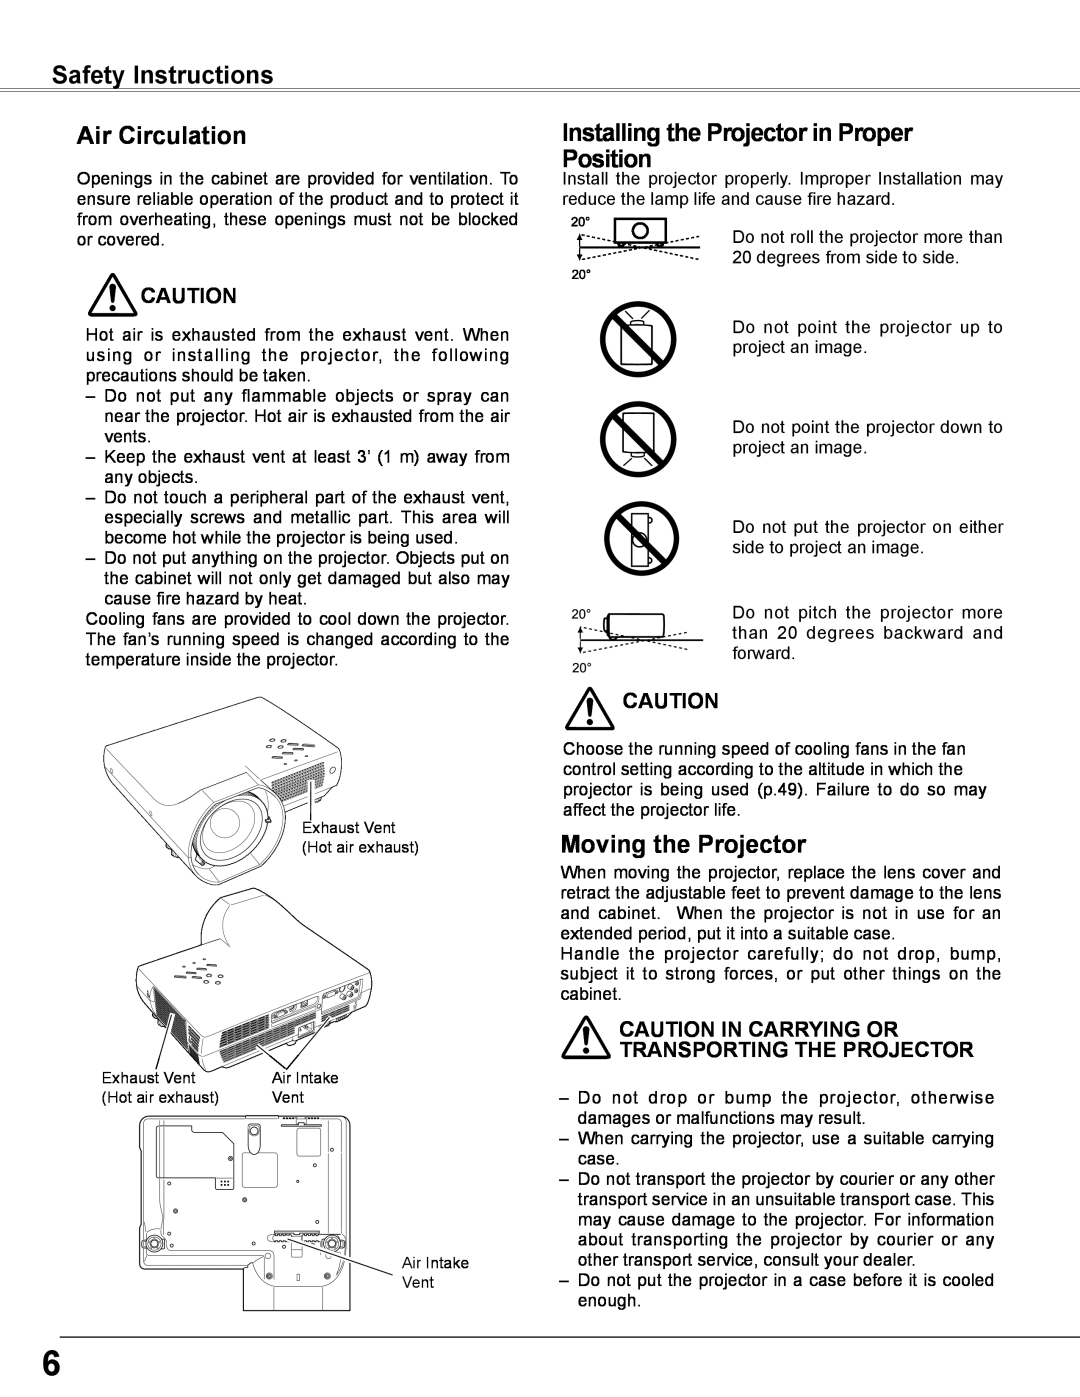 Sanyo PLC-WXL46 Safety Instructions Air Circulation, Installing the Projector in Proper Position, Moving the Projector 